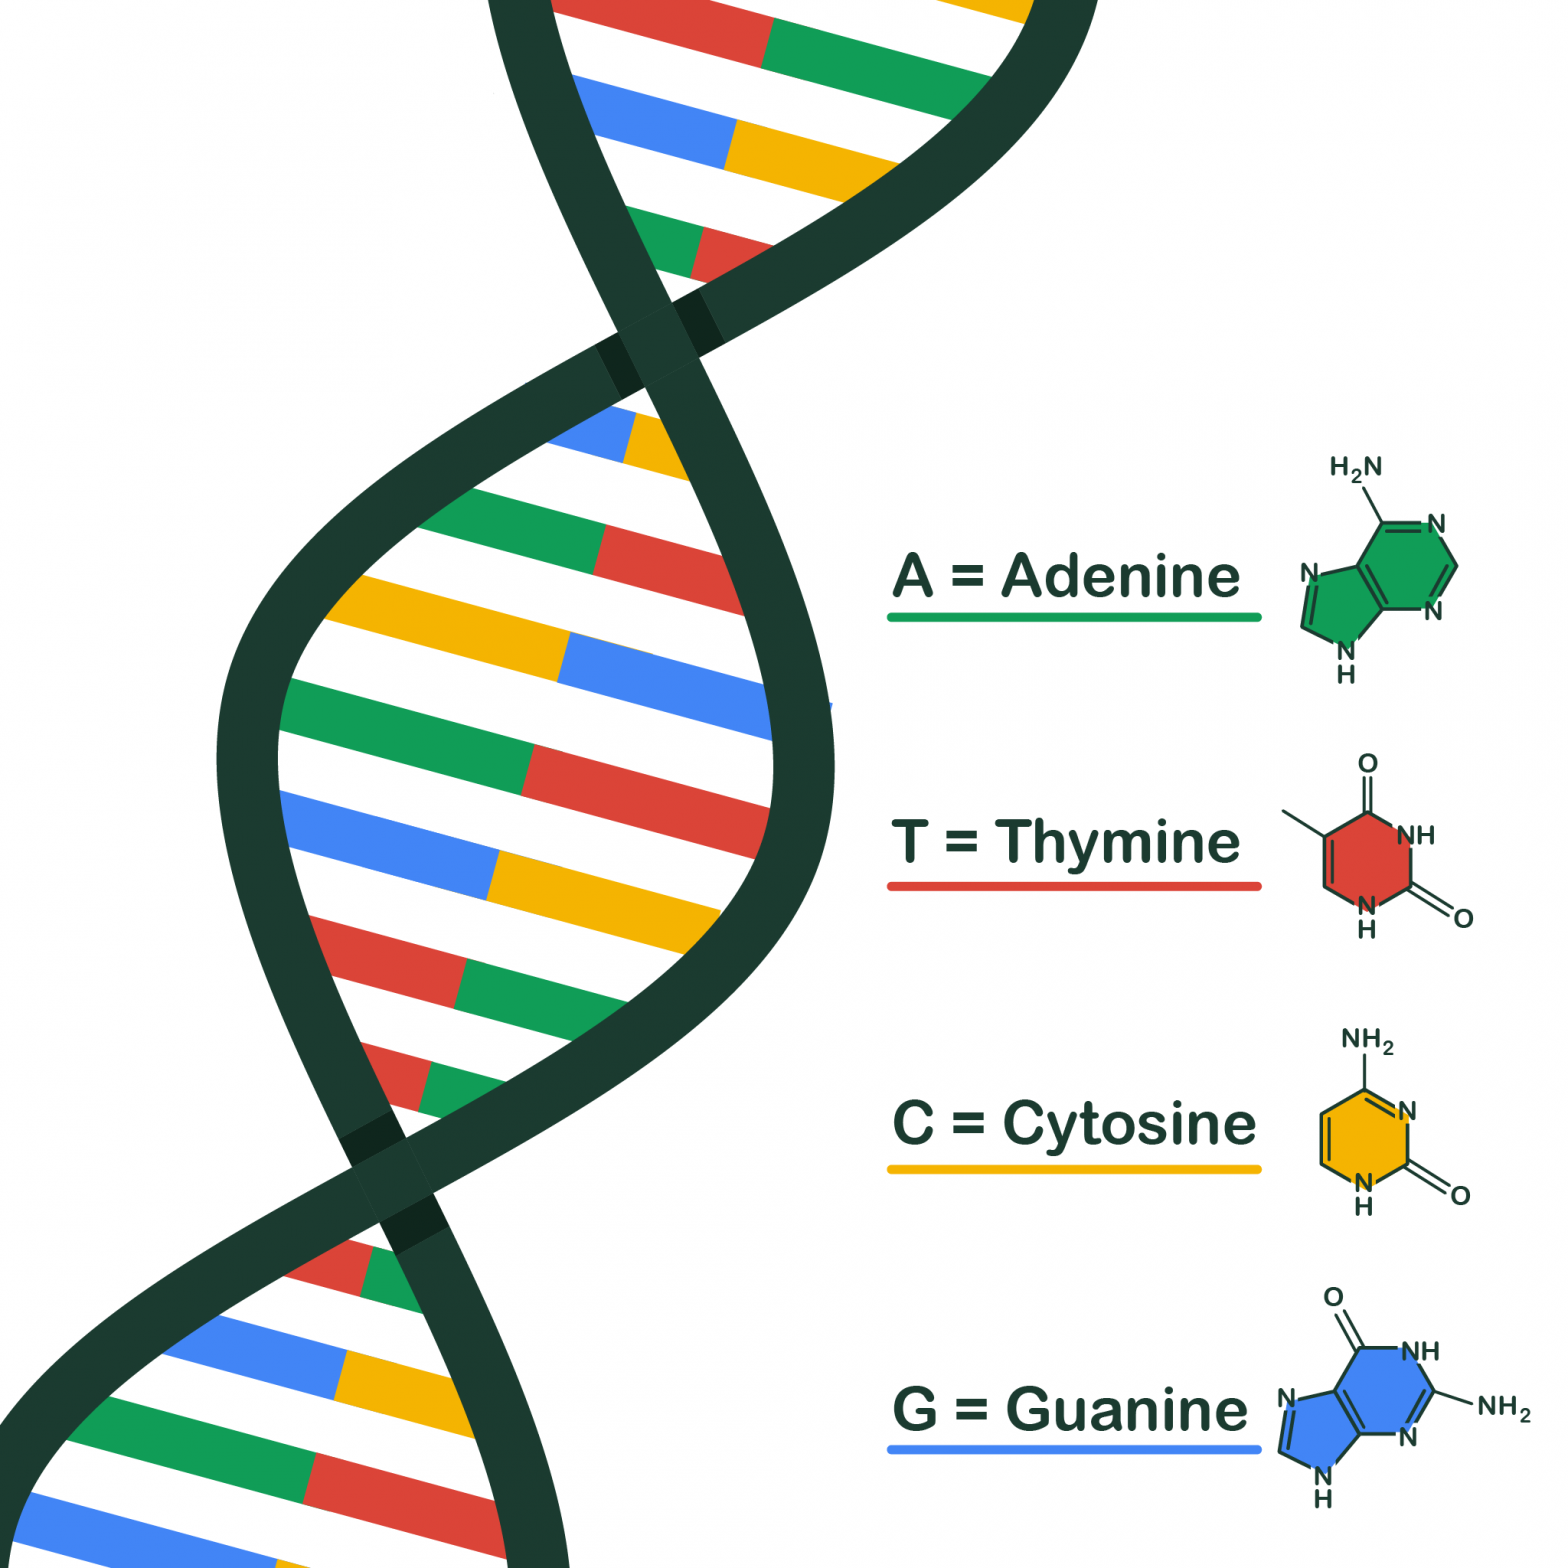 infographics_02 - Hong Kong Genome Institute